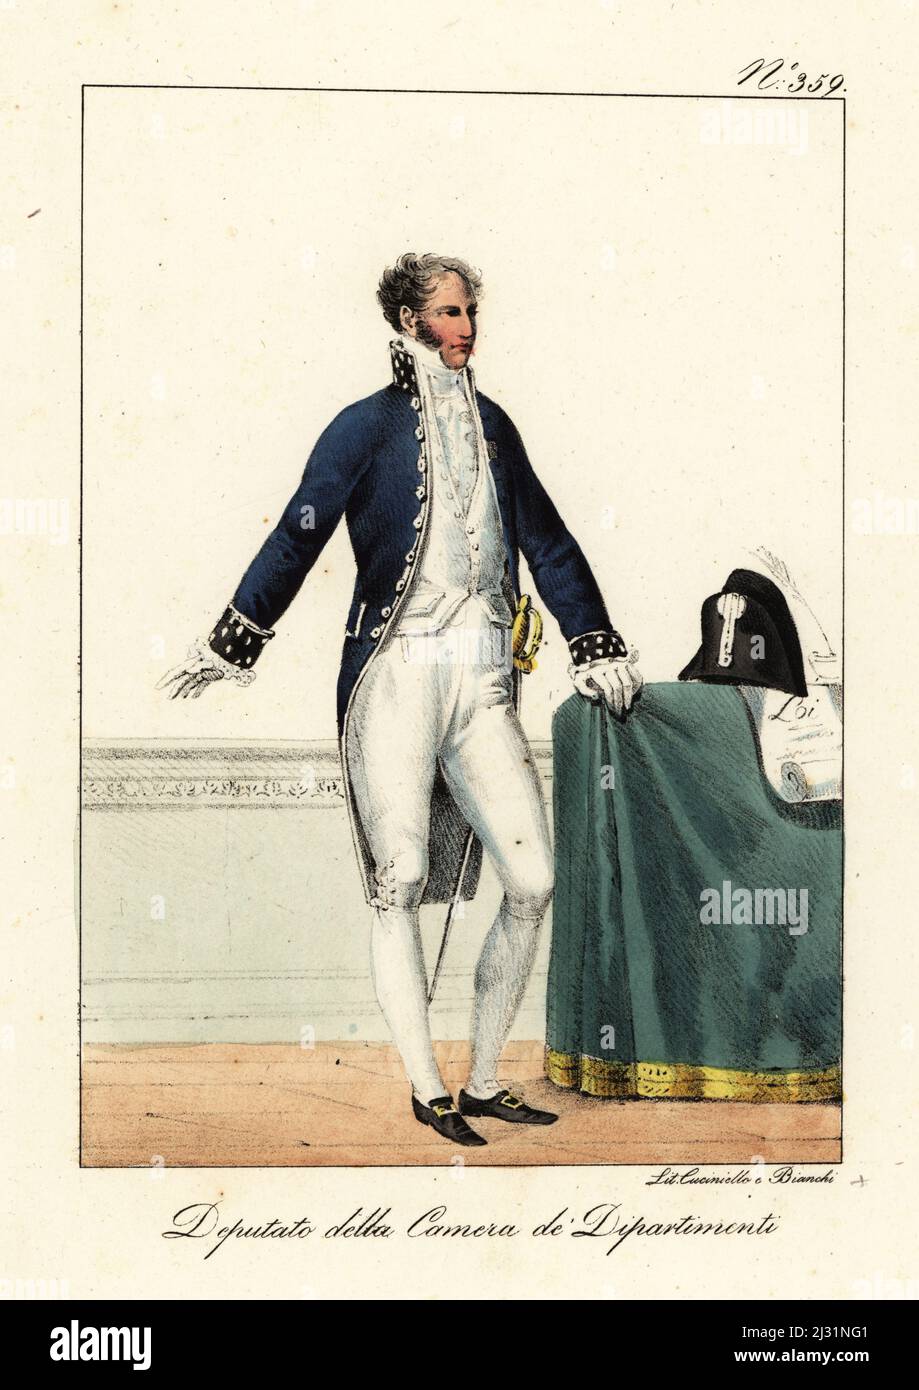 Costume of a member of the Chamber of Deputies of Departments, Bourbon Restoration, 1815. In blue coat with silver collar and cuffs, court sword, bicorne. Depute a la Chambre des députés des départements. Handcoloured lithograph by Lorenzo Bianchi and Domenico Cuciniello after Hippolyte Lecomte from Costumi civili e militari della monarchia francese dal 1200 al 1820, Naples, 1825. Italian edition of Lecomte’s Civilian and military costumes of the French monarchy from 1200 to 1820. Stock Photo